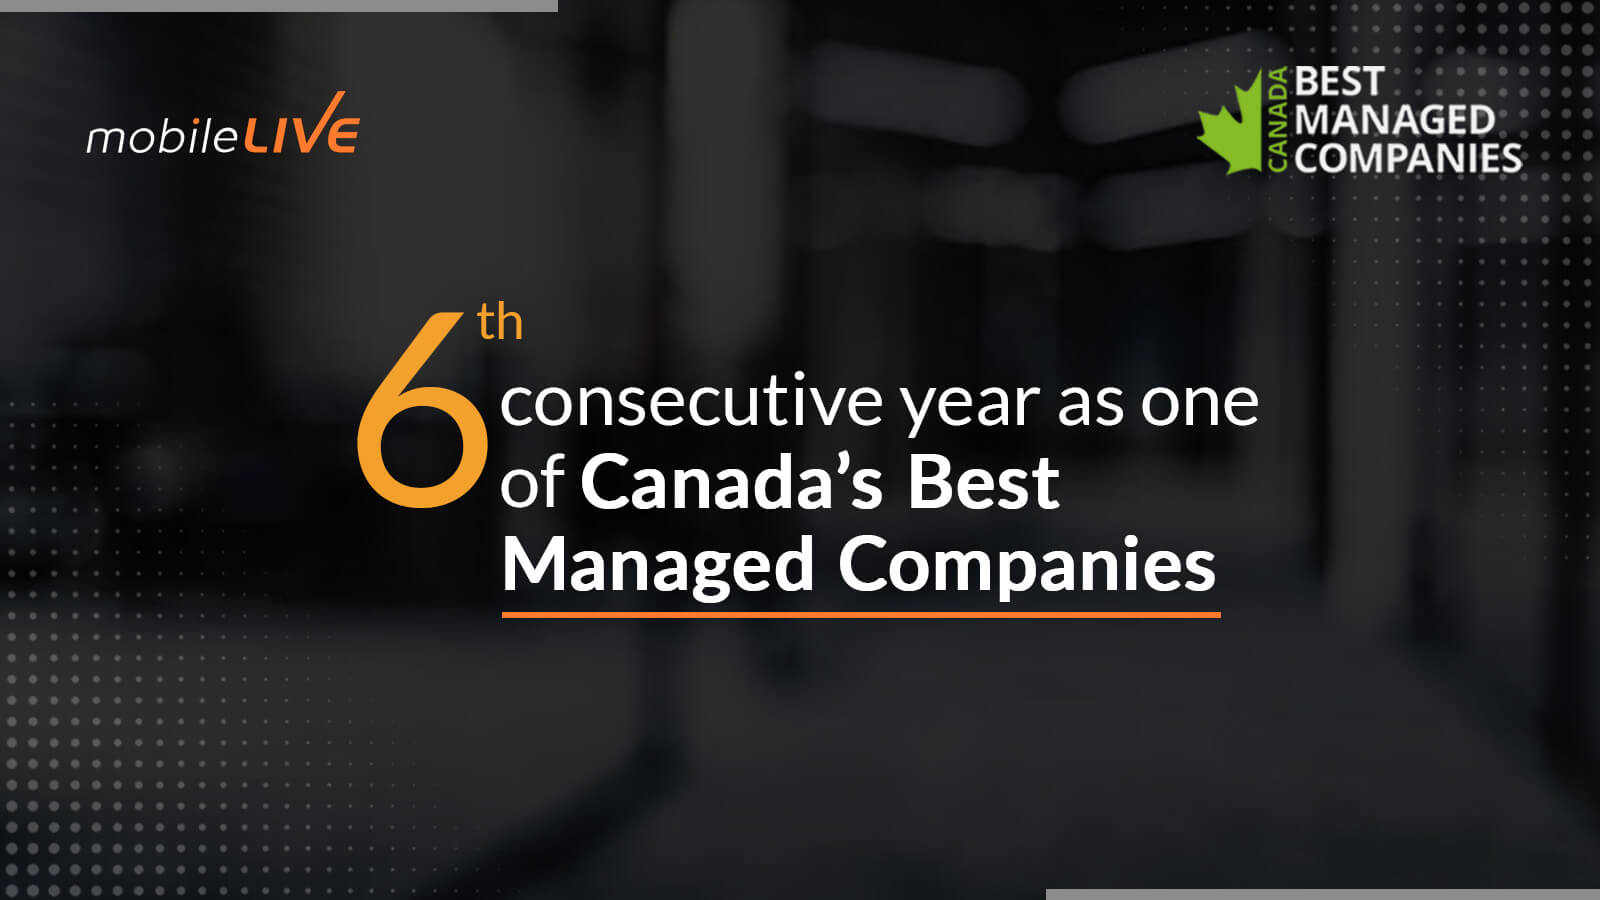 mobileLIVE maintains Best Managed Gold Standard, awarded Canada’s Best Managed for Sixth Consecutive Year